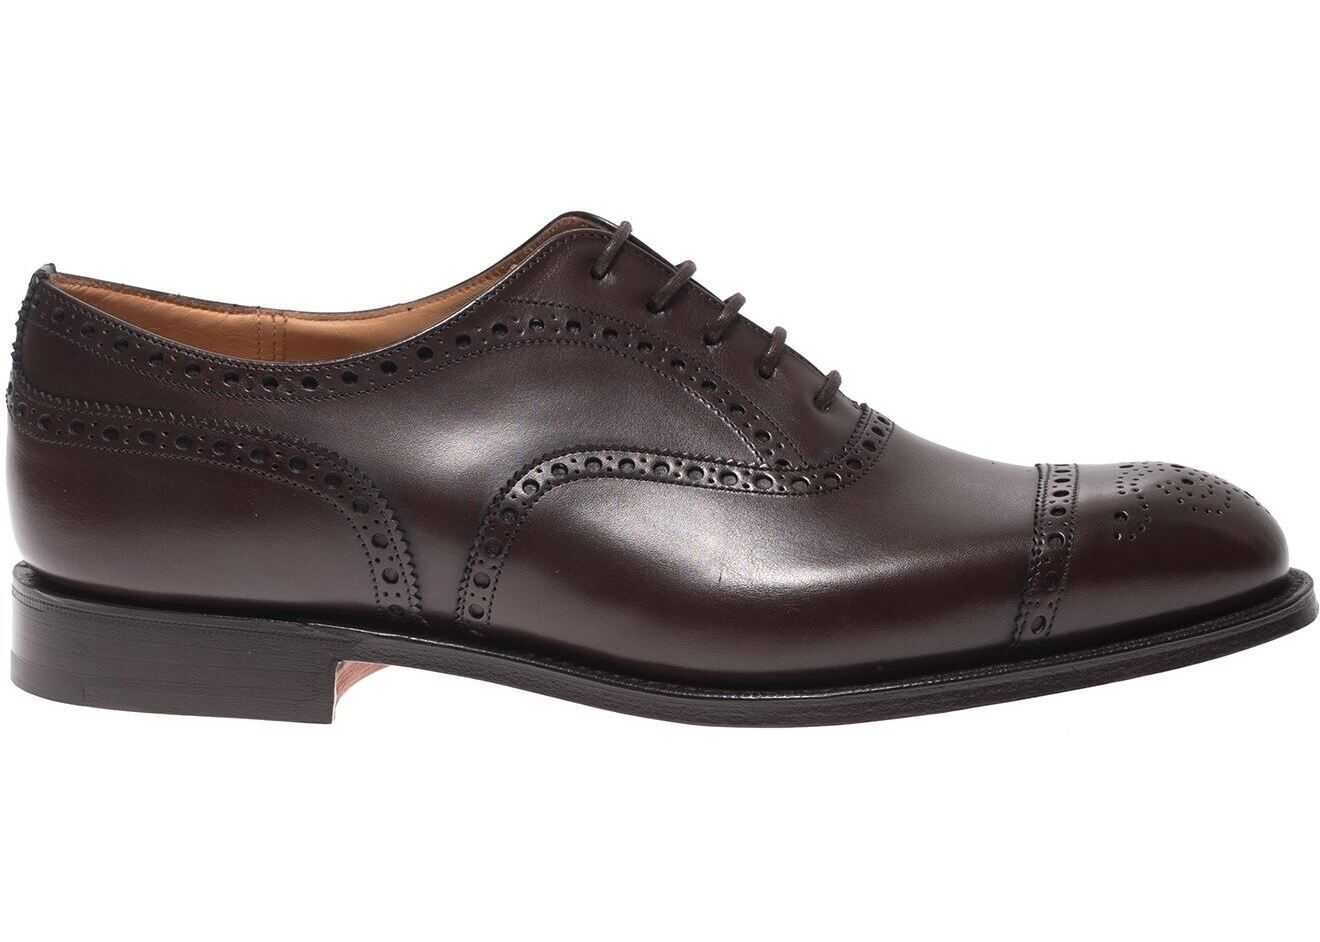 Diplomat 173 Oxford Shoes In Ebony Color Leather thumbnail